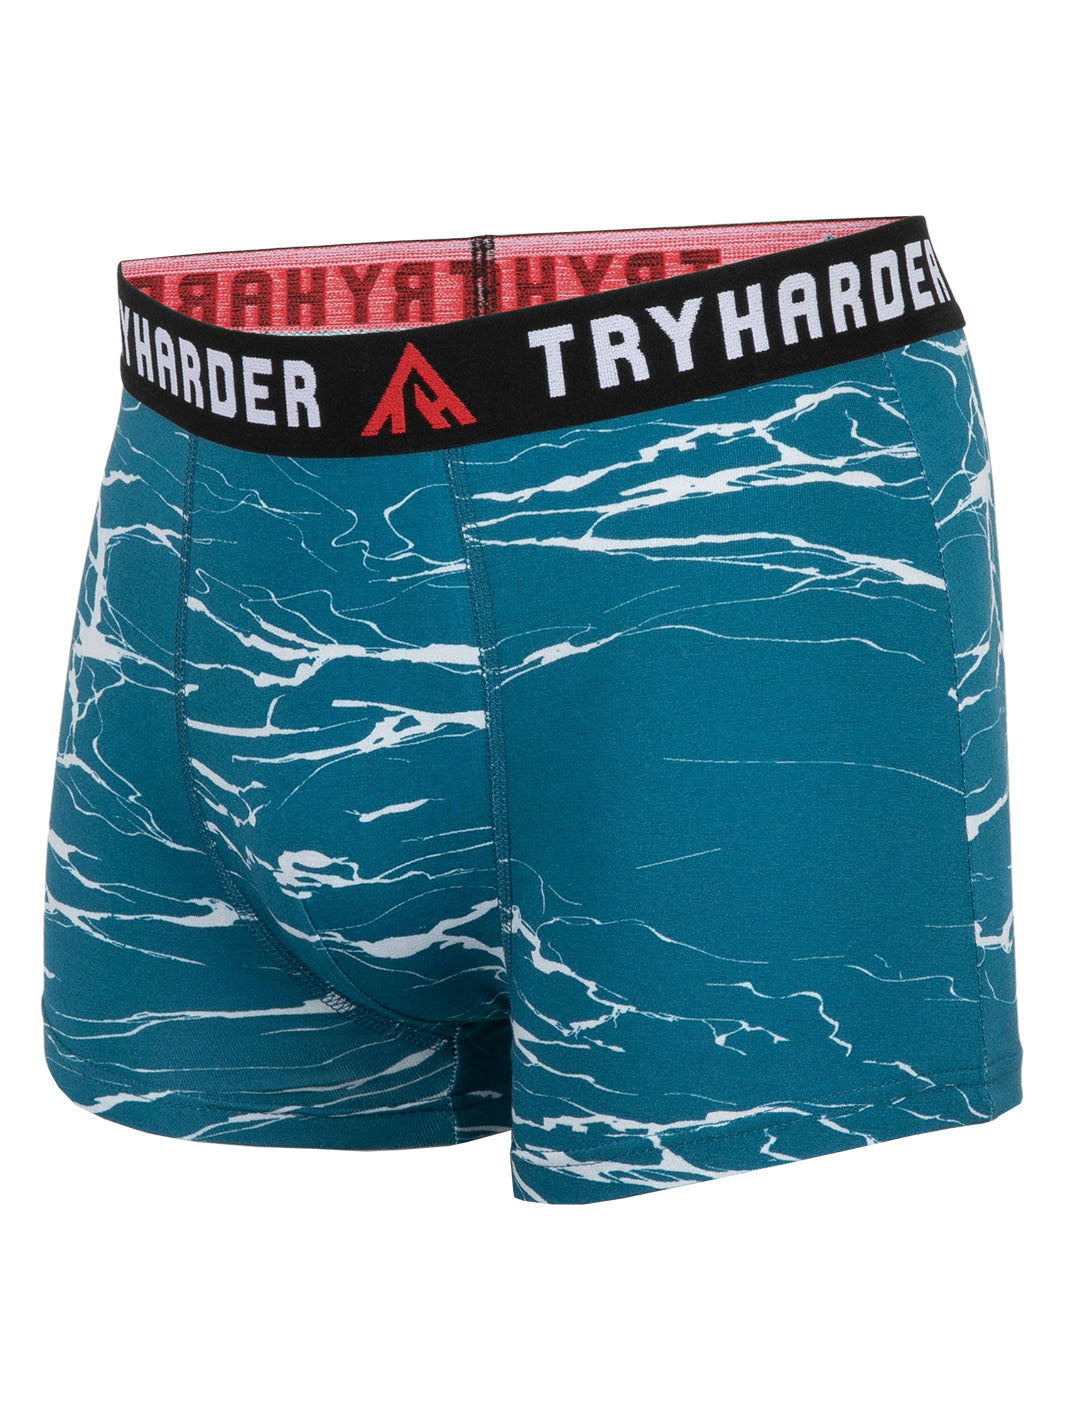 TRYHARDER - Boxer - Marble Blue 1 pack